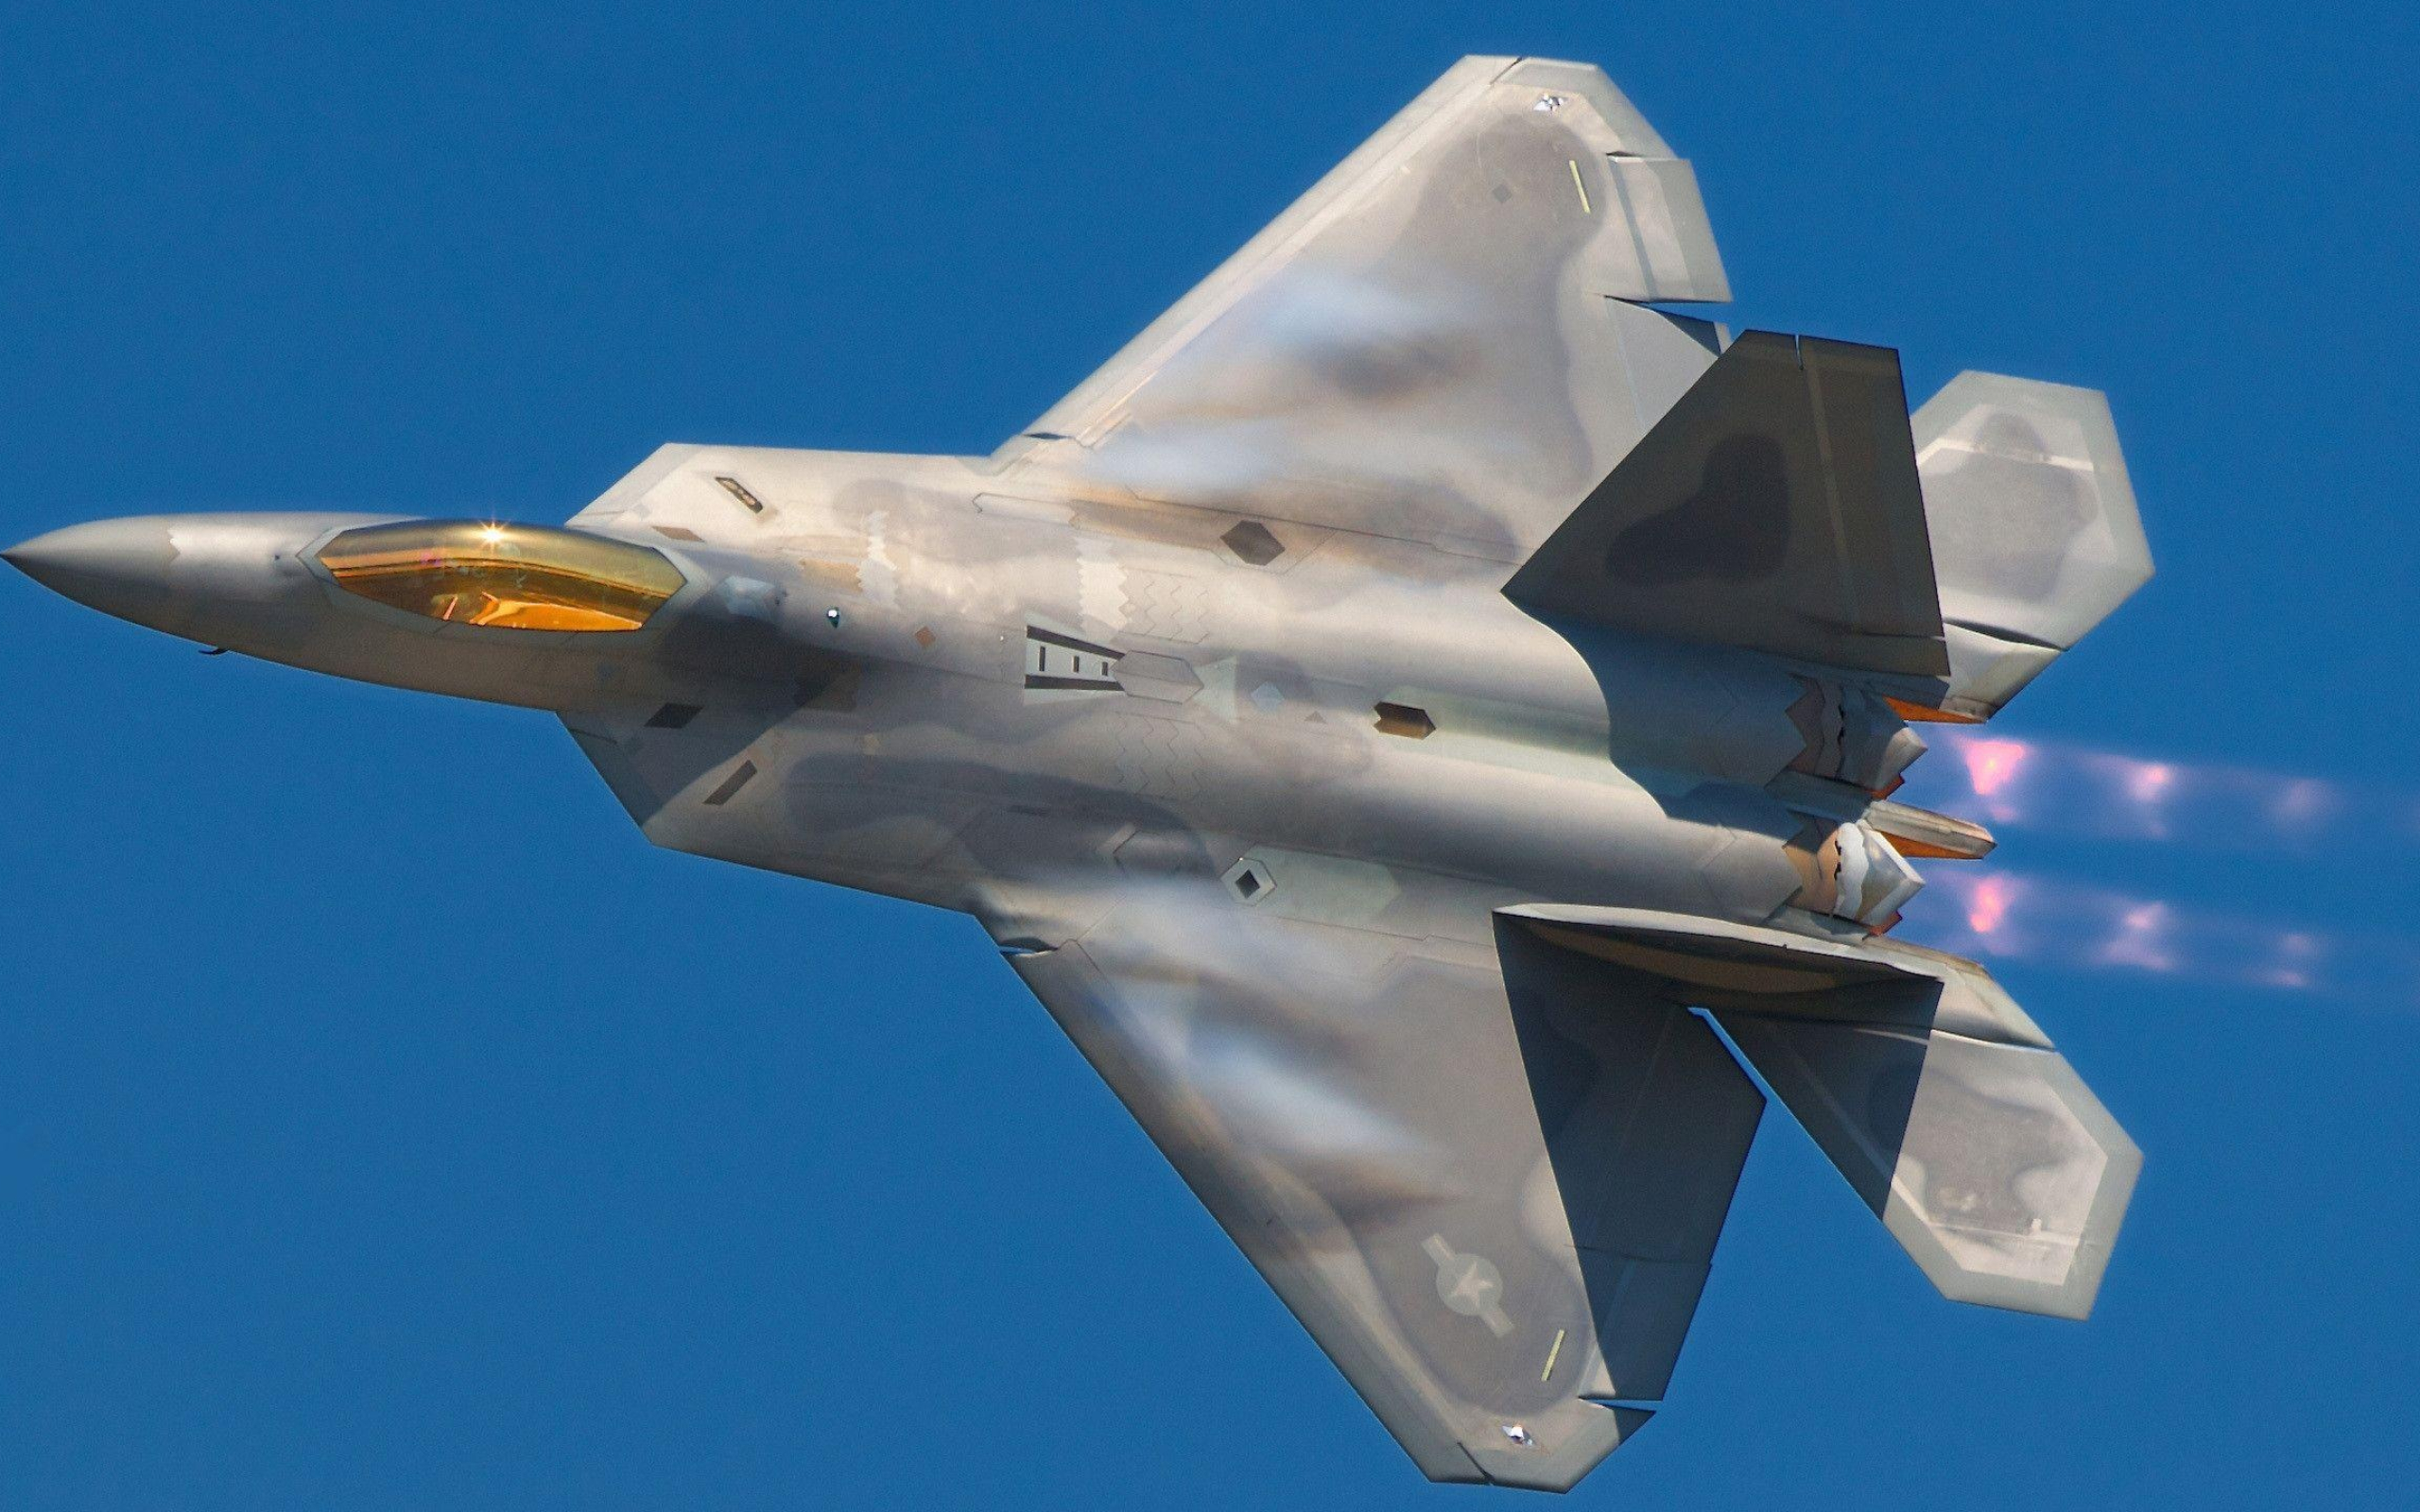 Lockheed airplane, F-22 wallpapers, Top free backgrounds, 2560x1600 HD Desktop